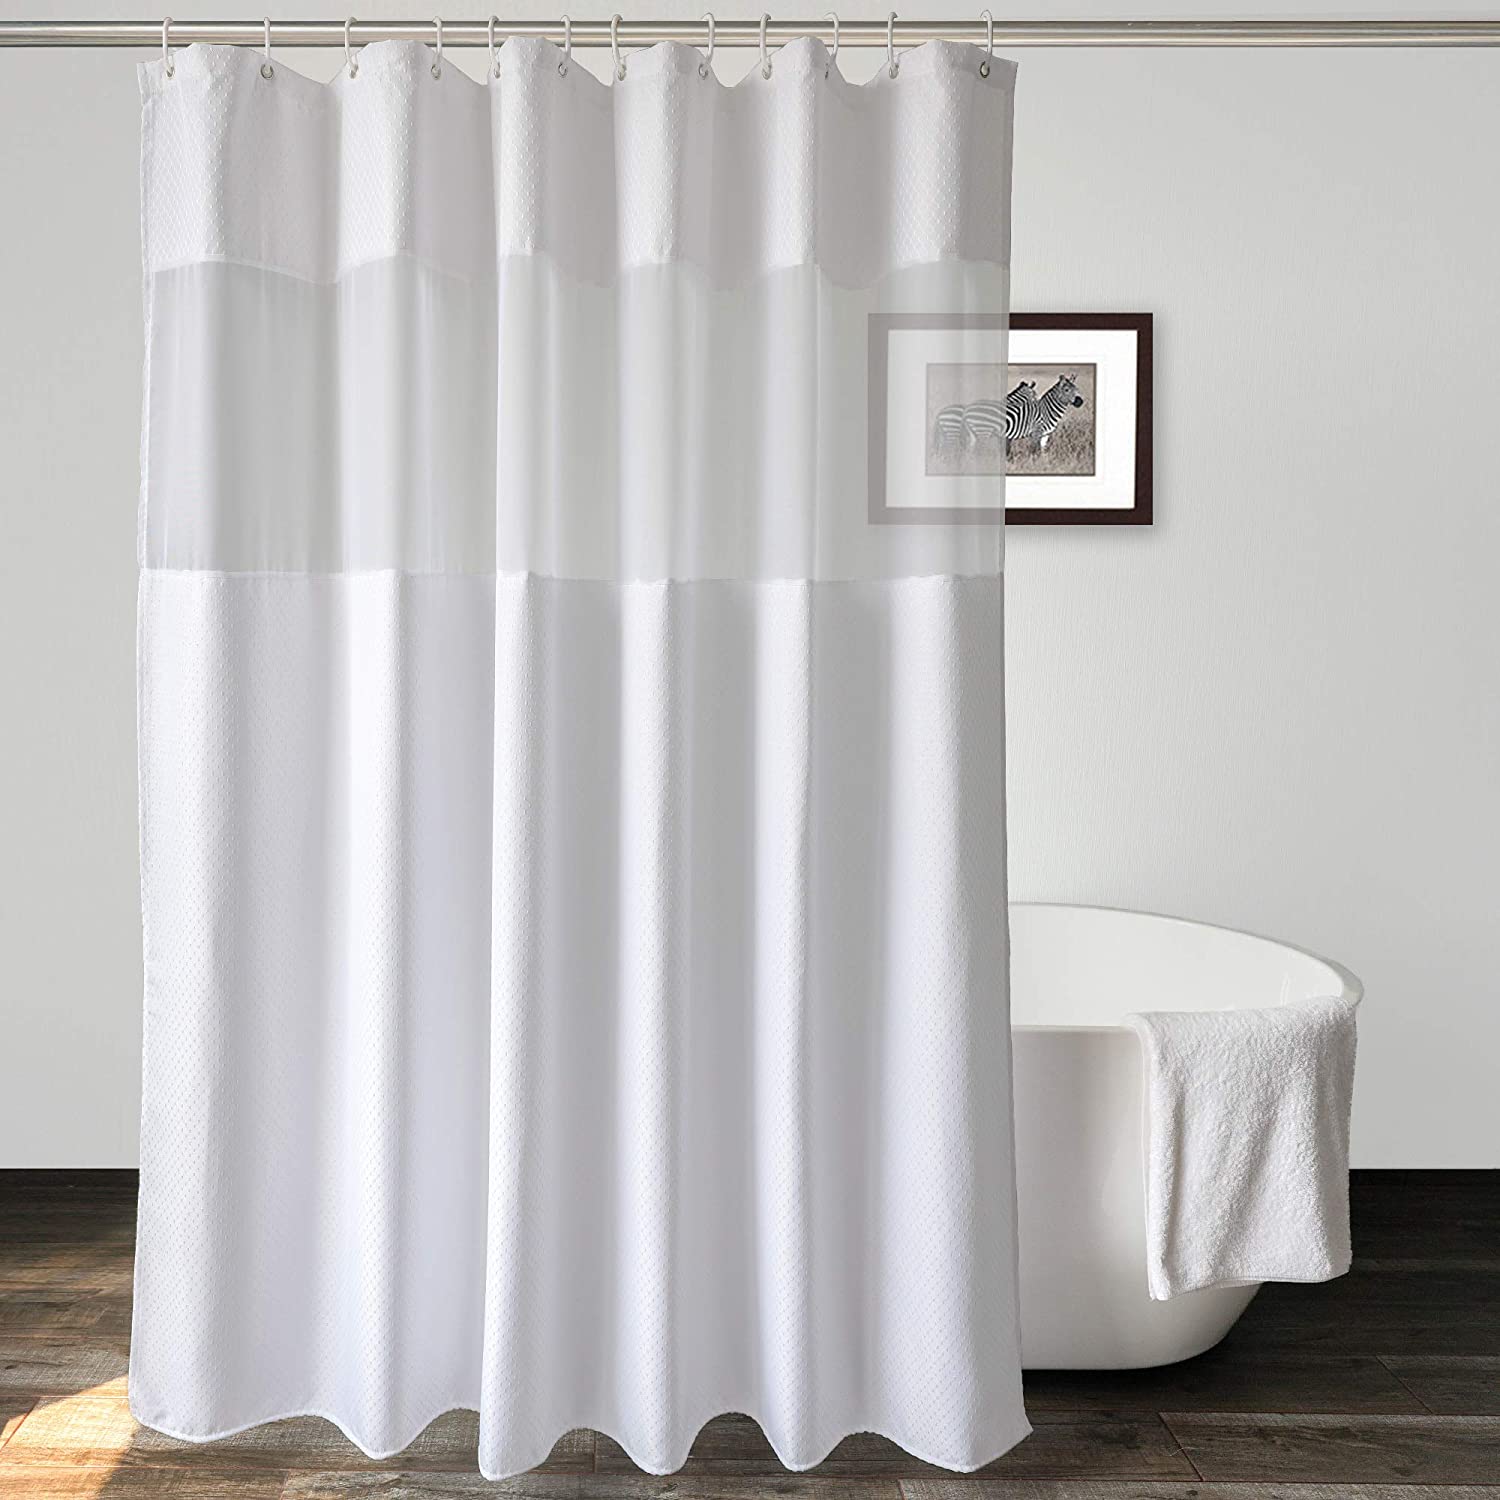 R mDesign Extra Long Hotel Quality Polyester/Cotton Blend Fabric Shower Curtain 